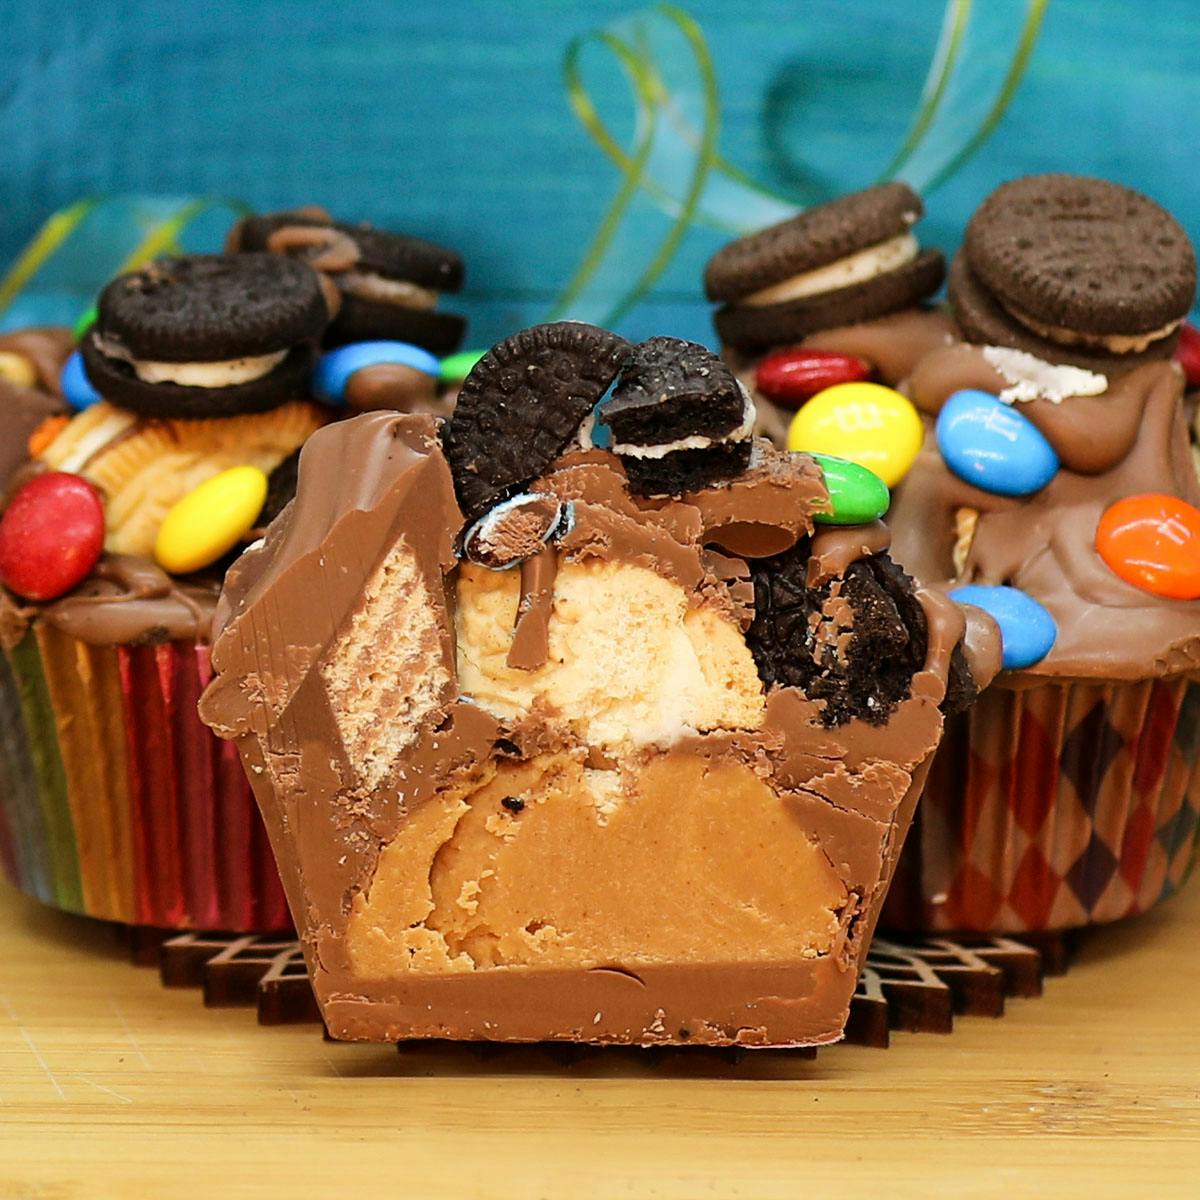 Giant Peanut Butter Cup - M&M – The Afterglow Boutique